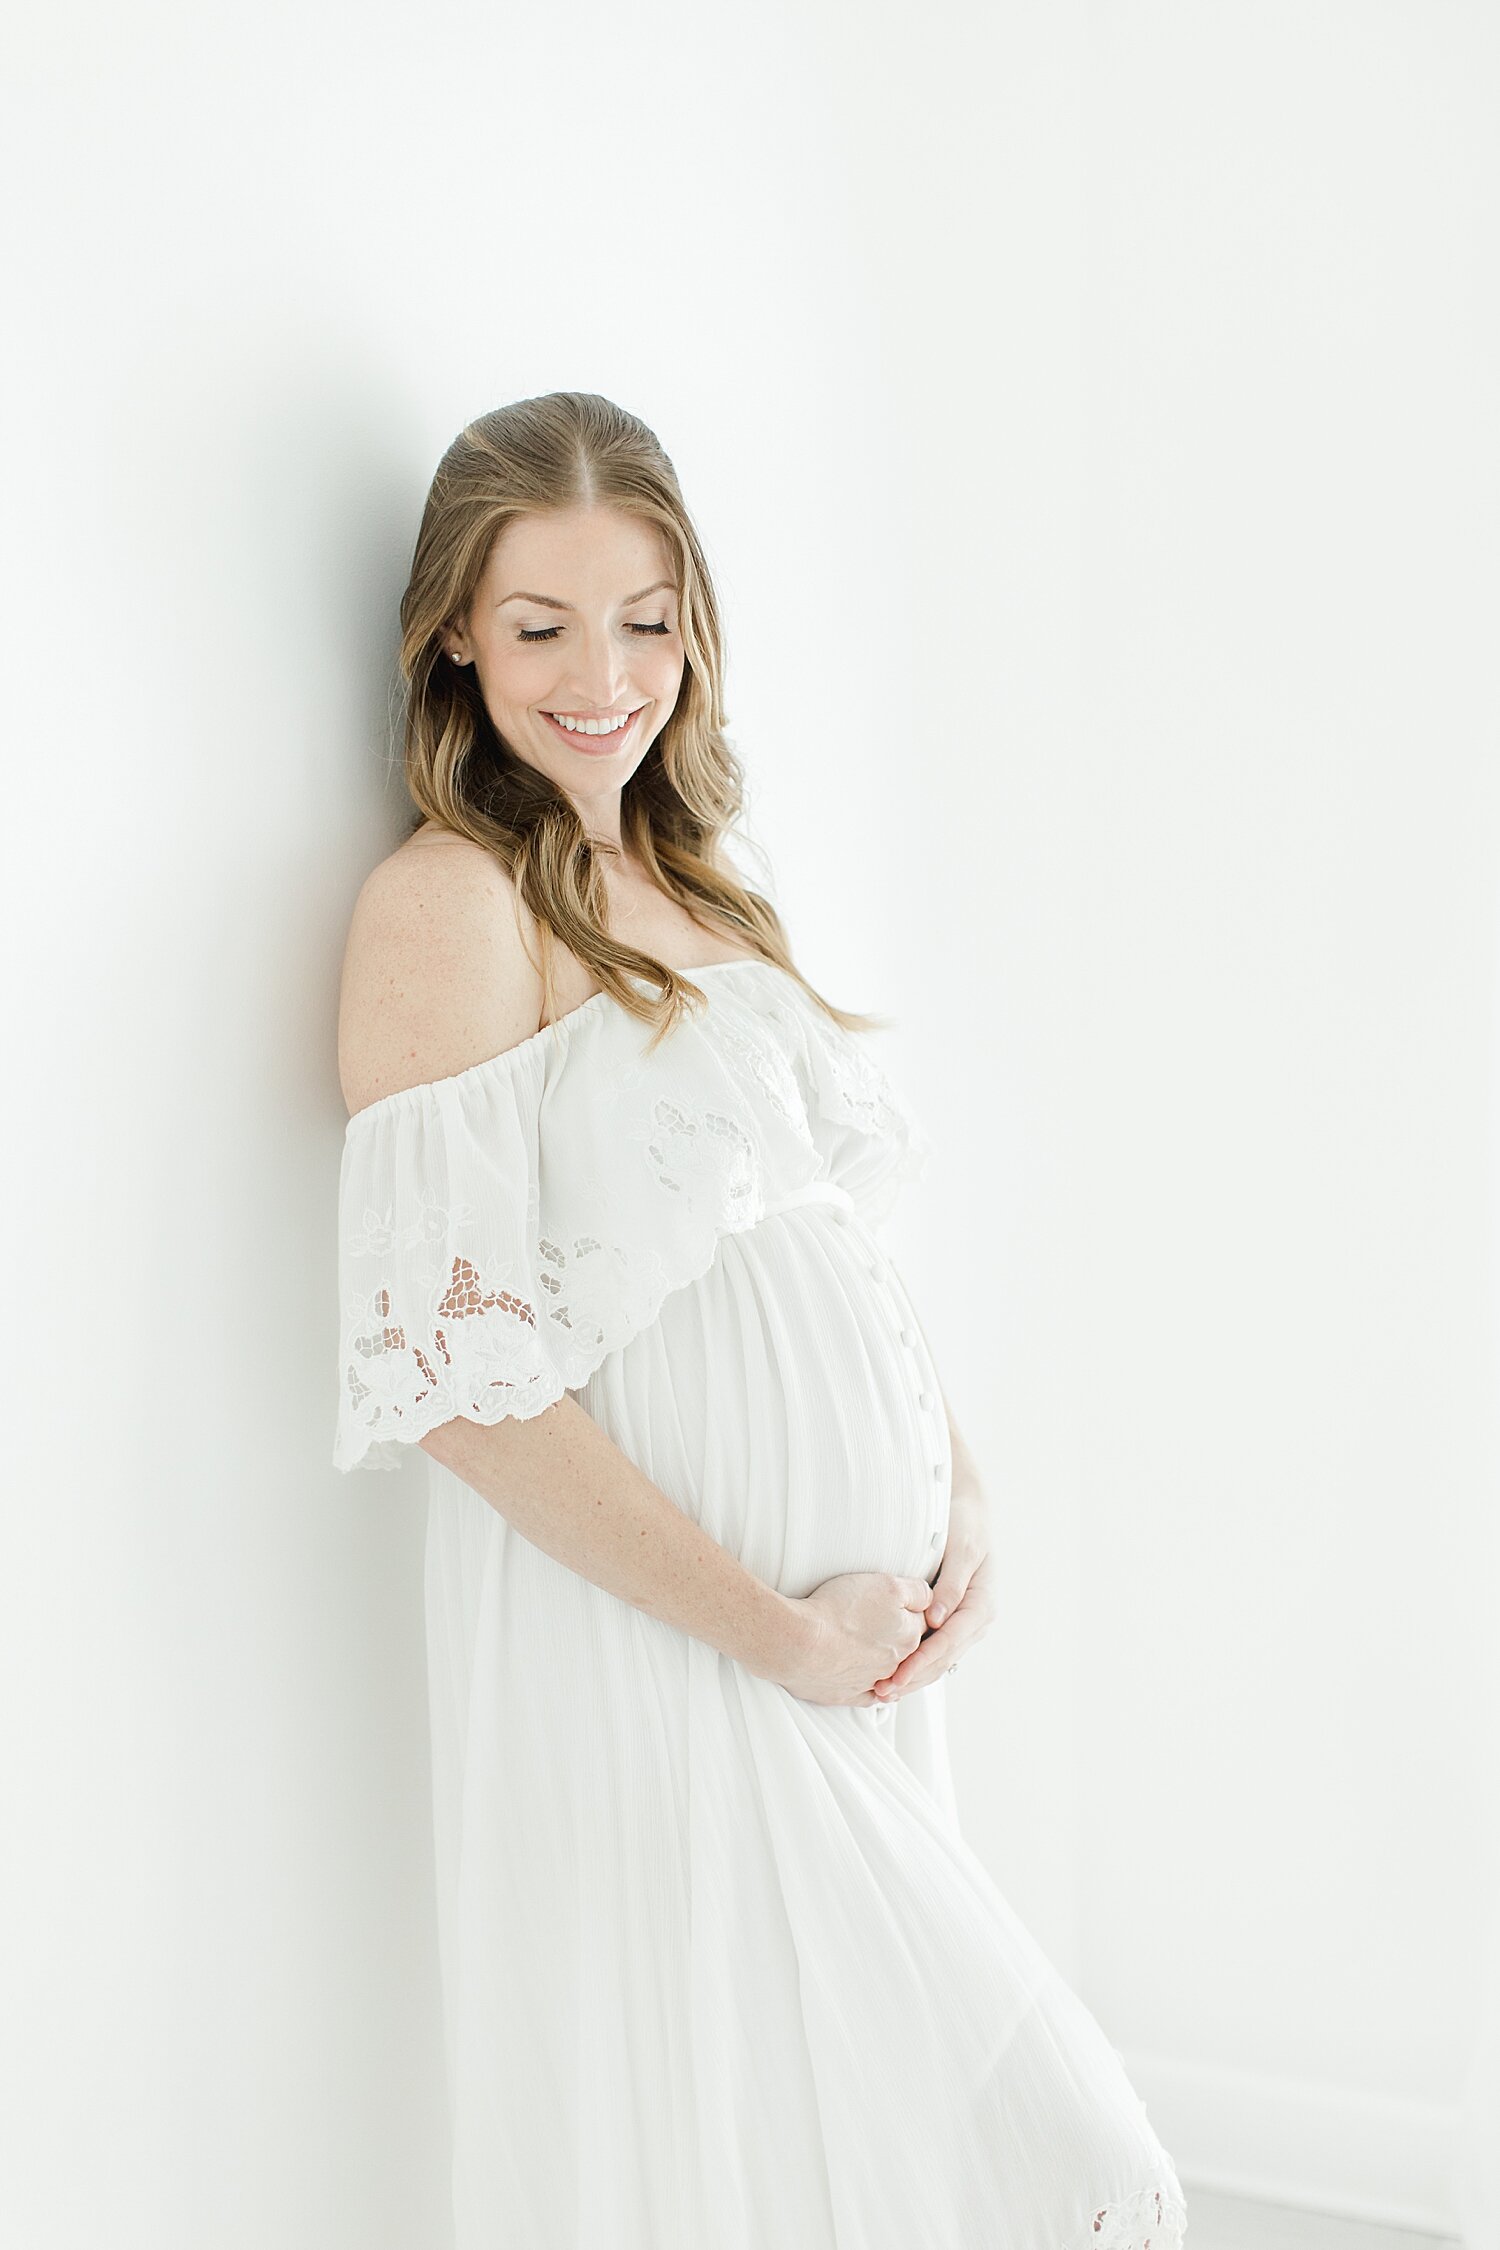 Mama-to-be wearing white fillyboo maternity dress for photos in studio with Kristin Wood Photography.